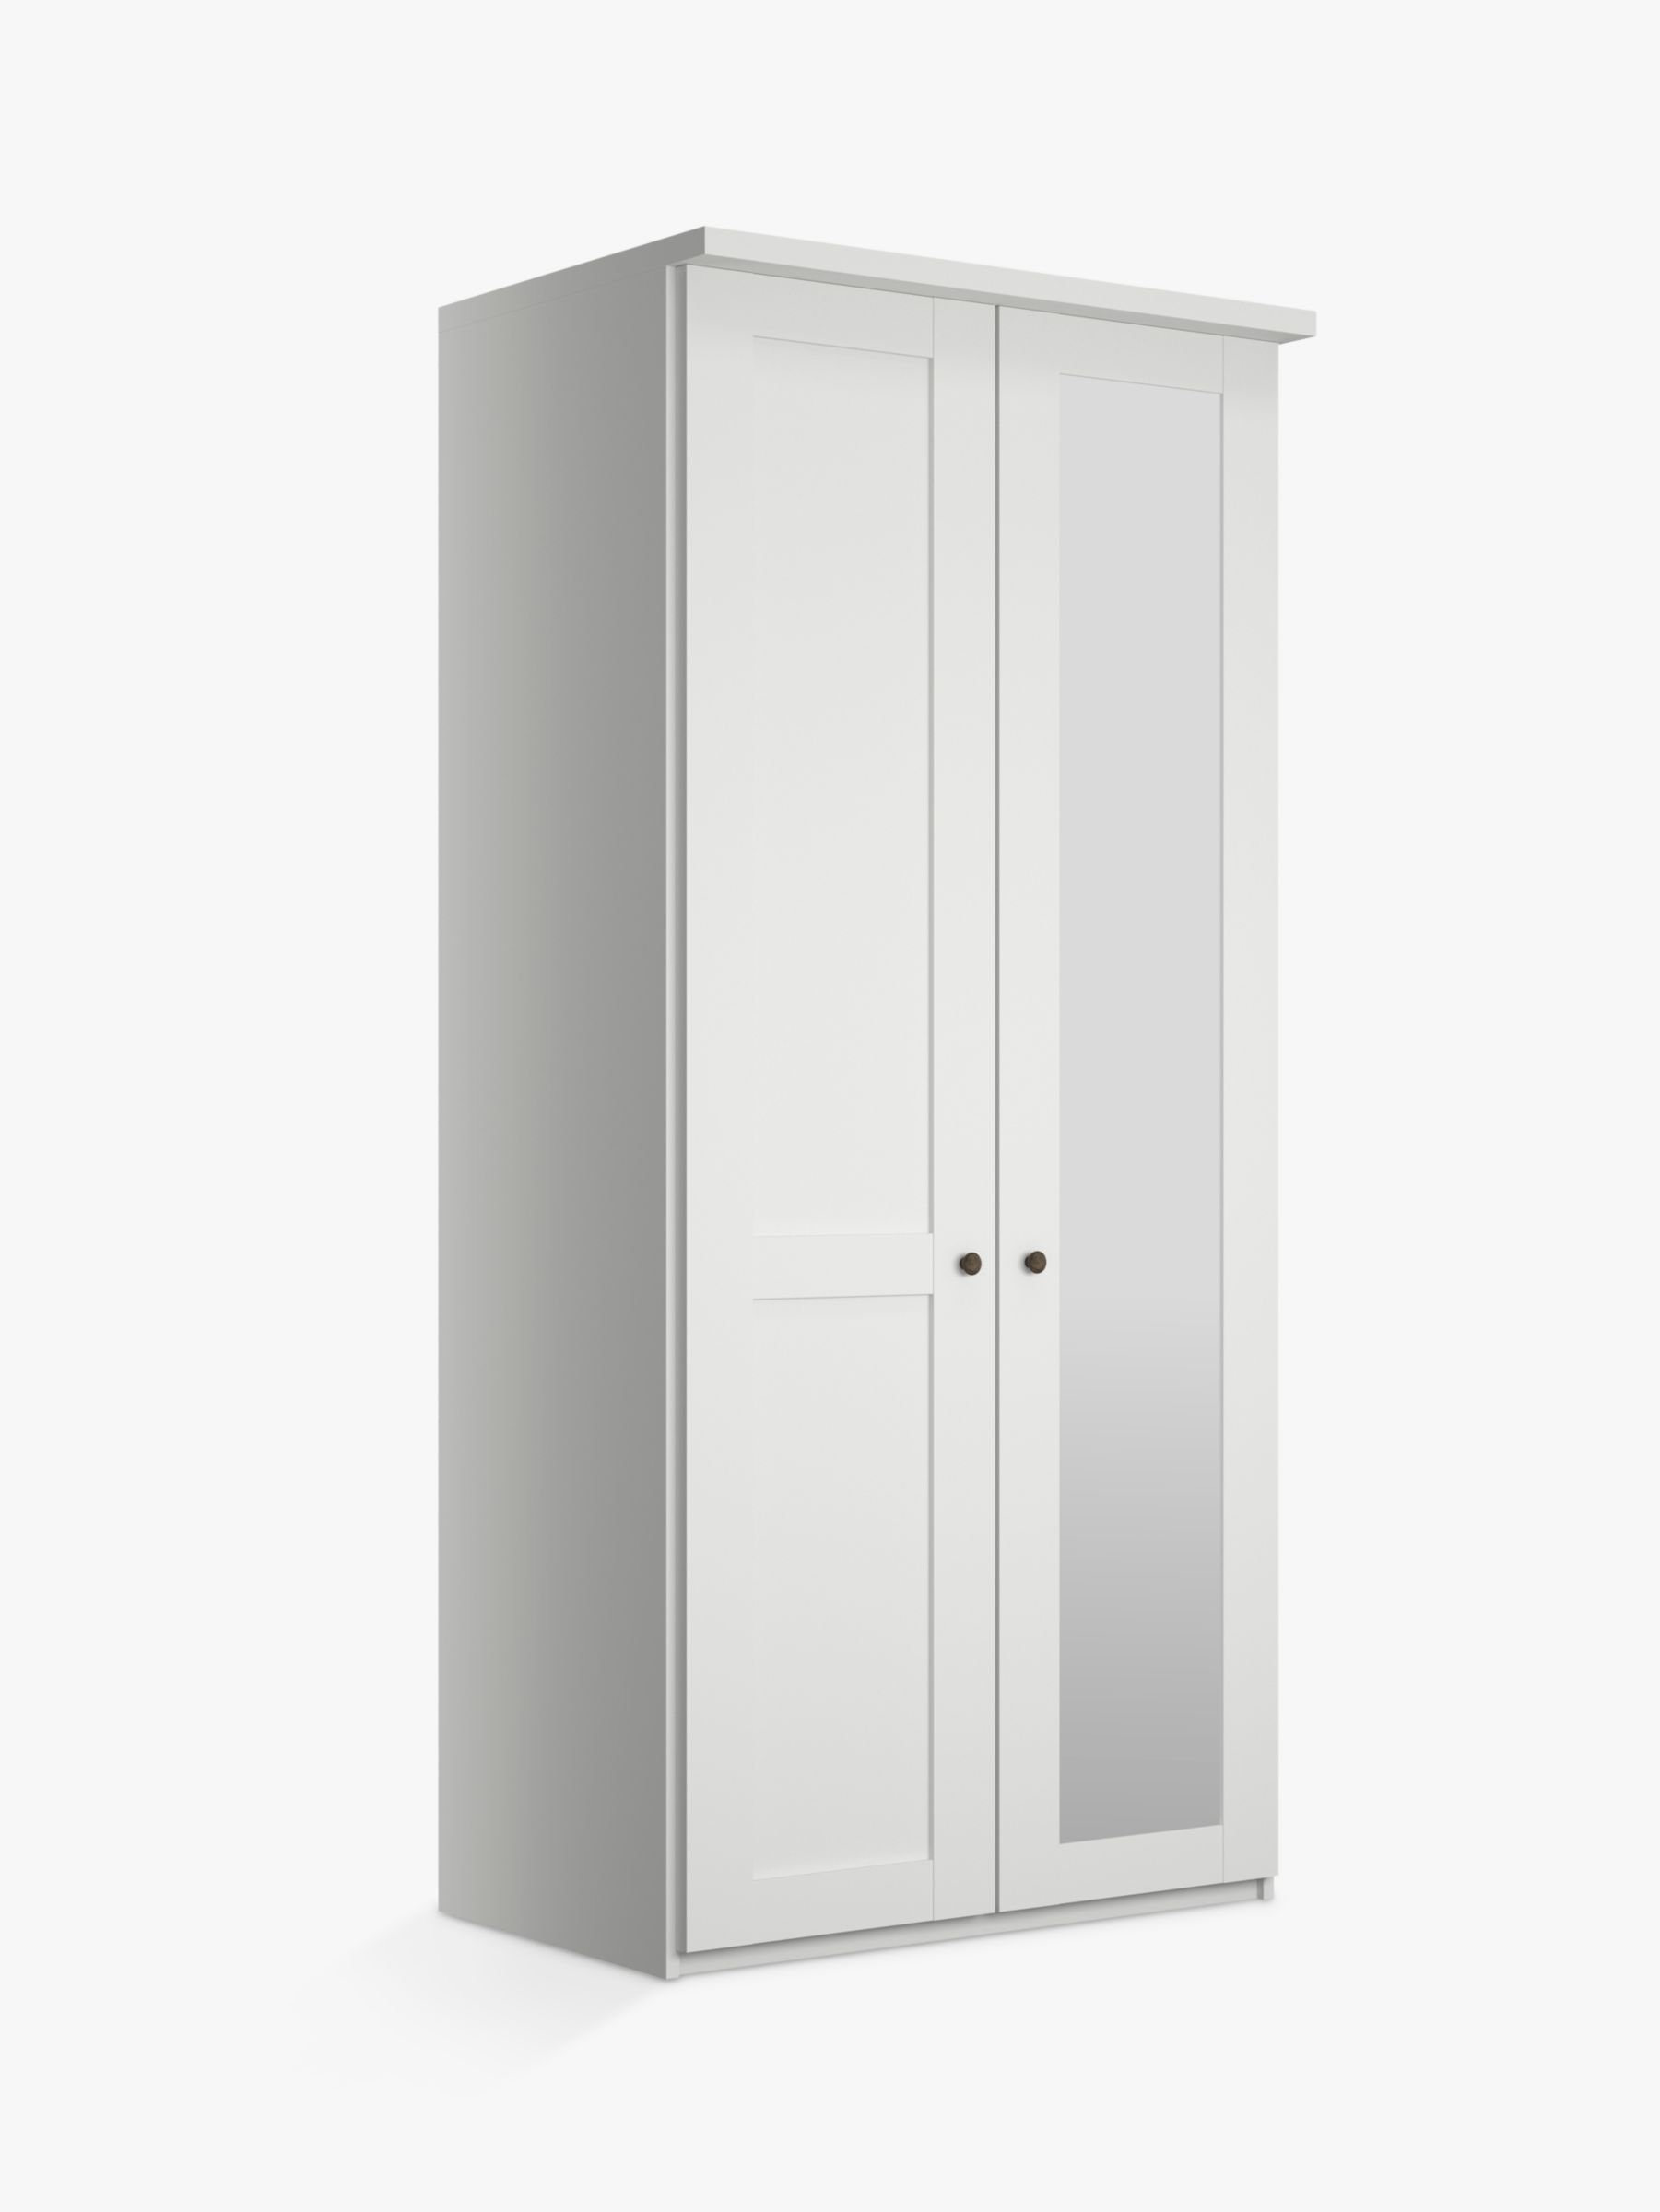 Photo of John lewis marlow 100cm hinged wardrobe with right mirror